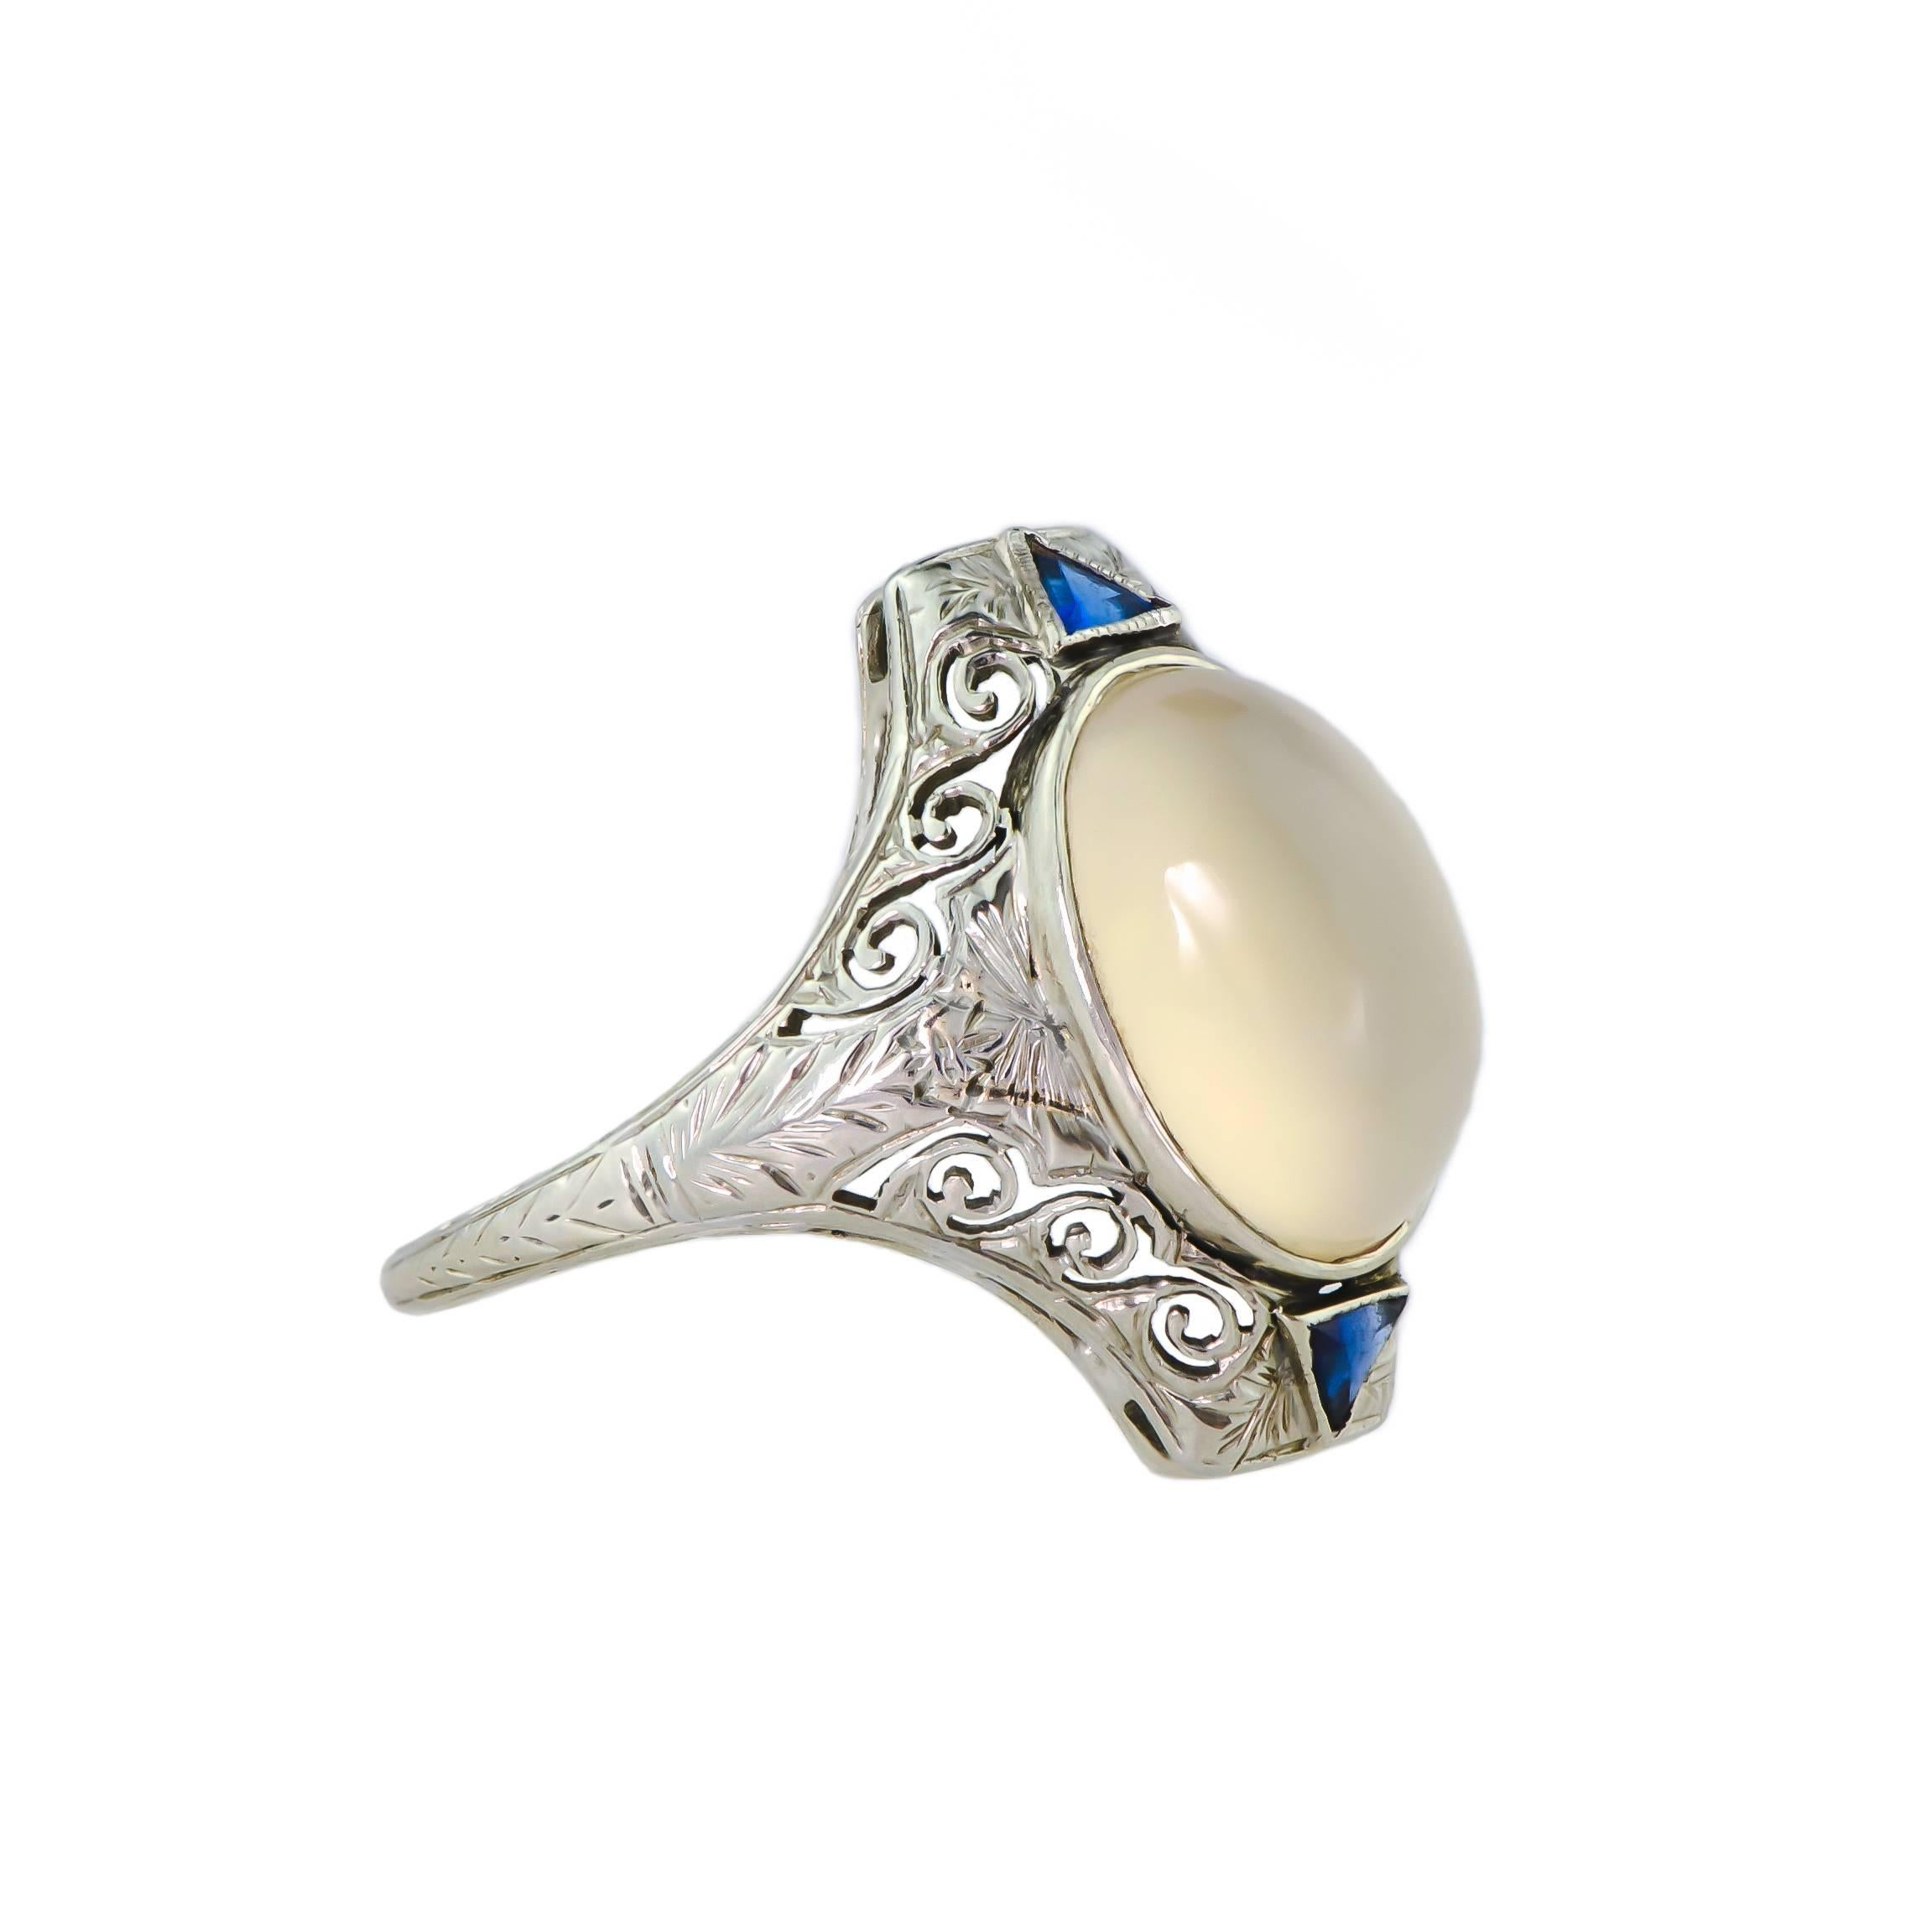 Art Deco circa 1920 moonstone and 14kt white gold filigree ring containing one oval moonstone measuring approximately 13.5mm by 9.5mm bezel set into a pierced and filigree 14kt white gold ring mount further accented with two triangular cut synthetic